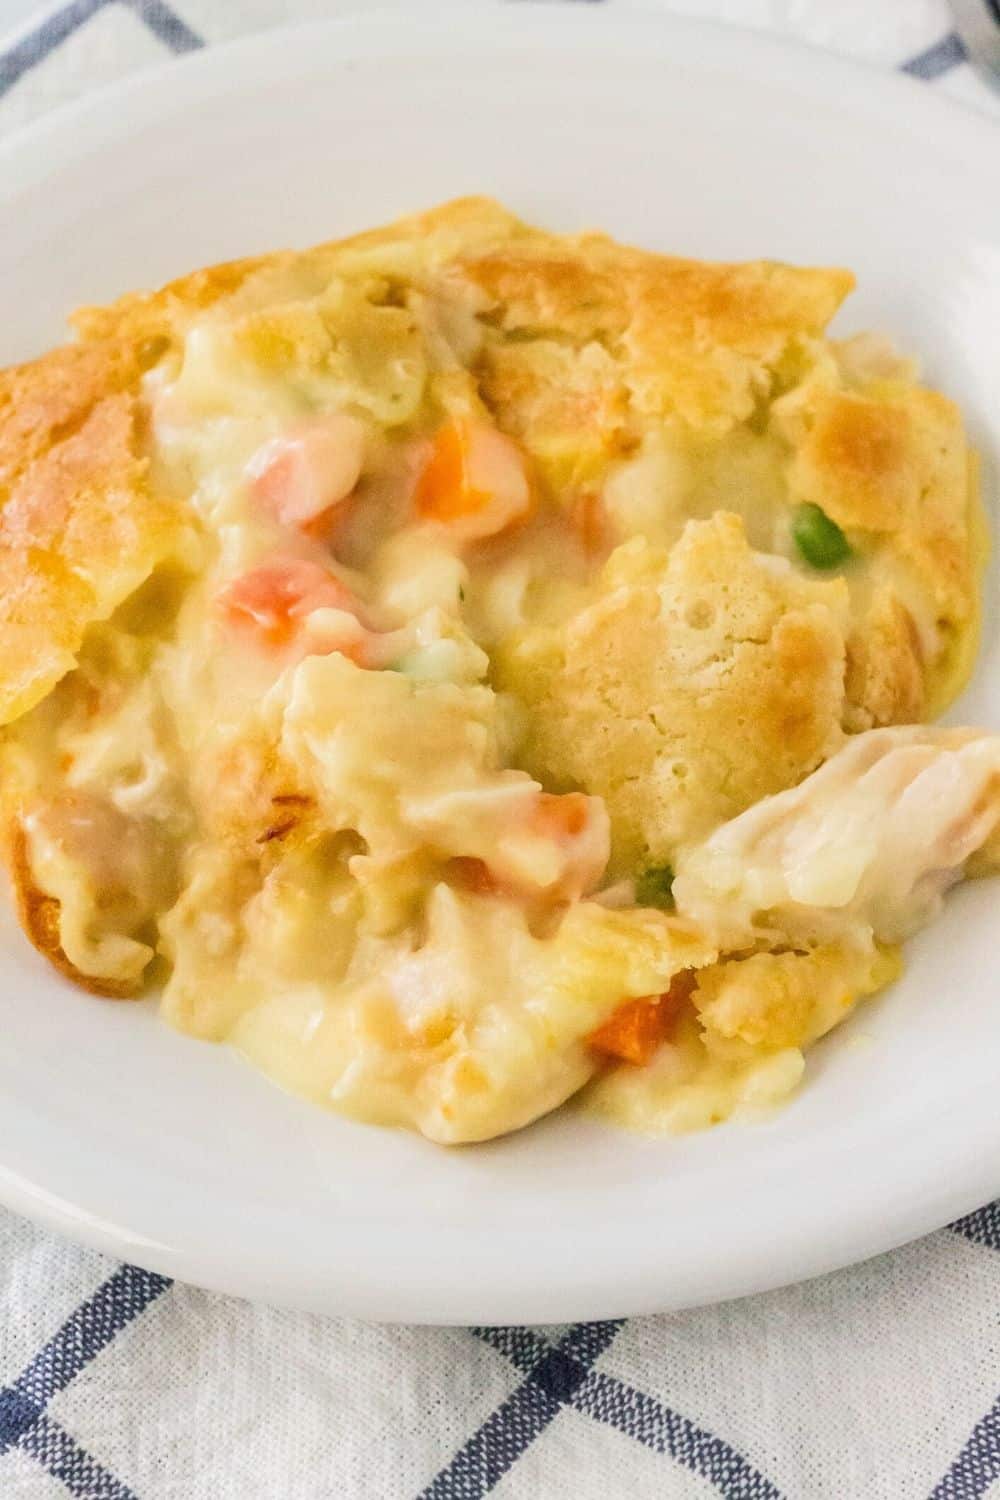 chicken and biscuit cobbler served on a white plate, showing tender chicken, vegetables, and a biscuit crust.